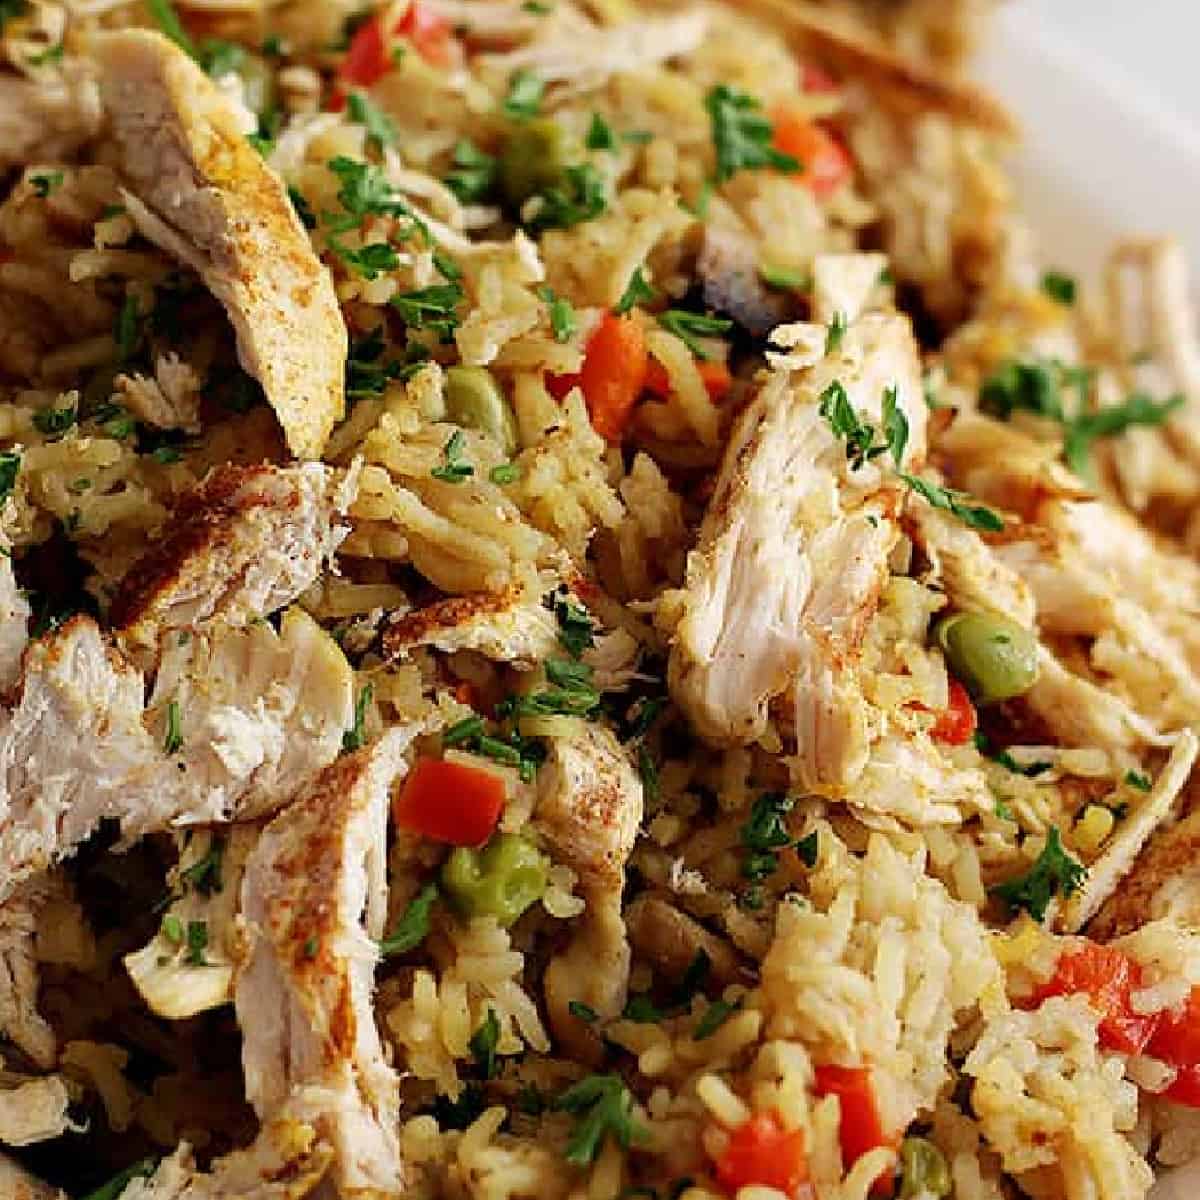 Instant pot chicken and rice is ready in less than 30 minutes! Packed with veggies and so much flavor, this dish is perfect for a quick dinner!
